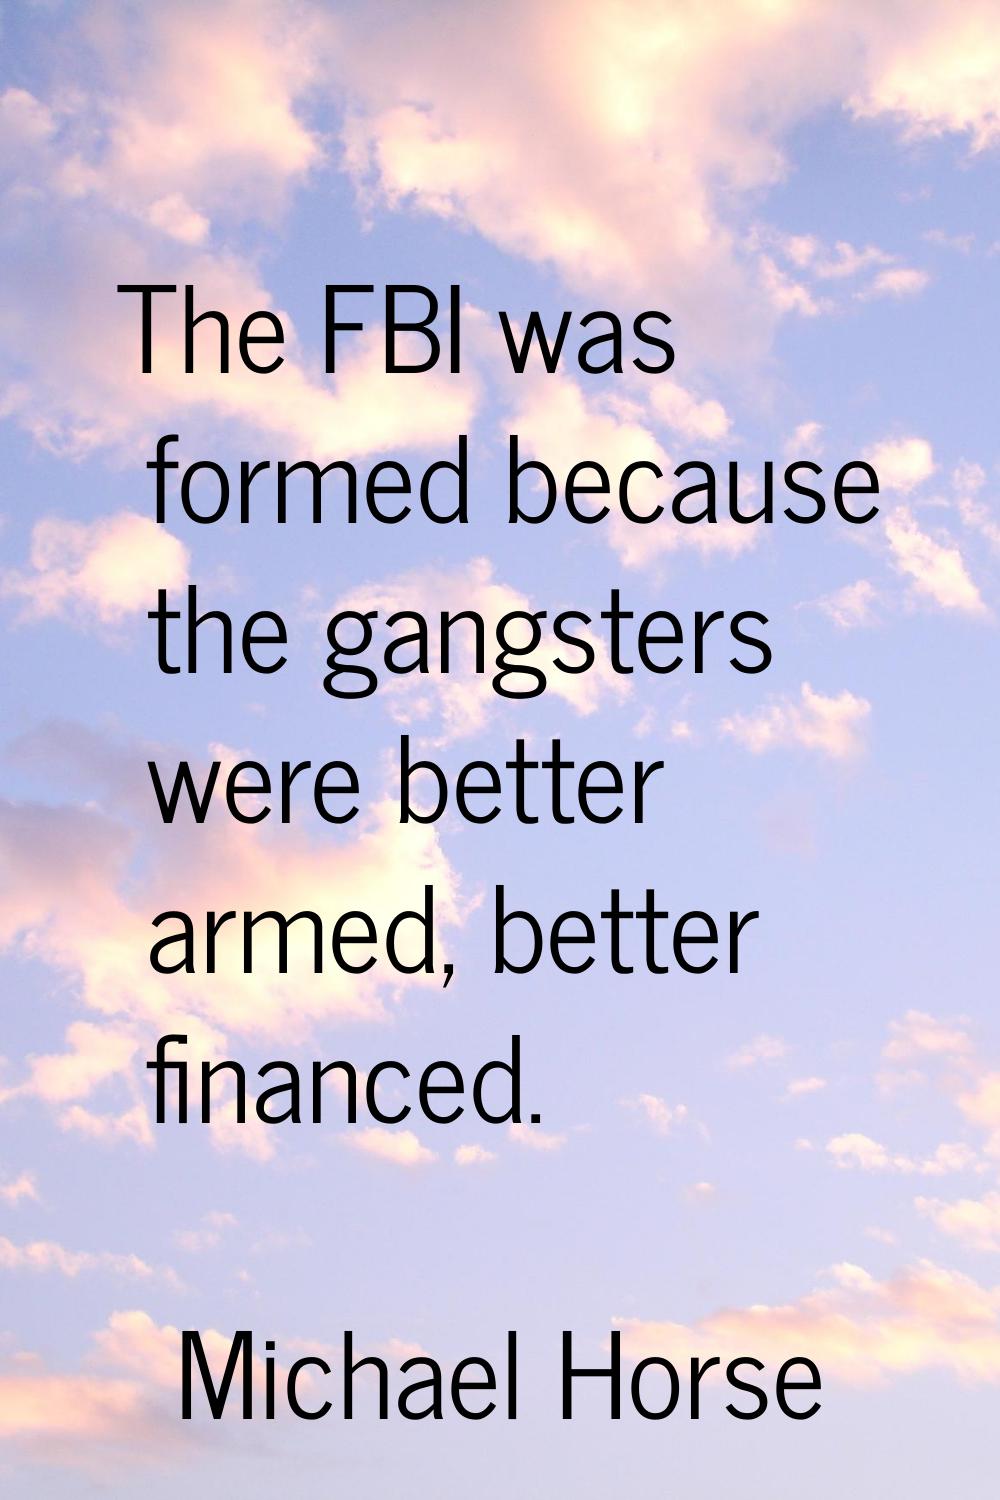 The FBI was formed because the gangsters were better armed, better financed.